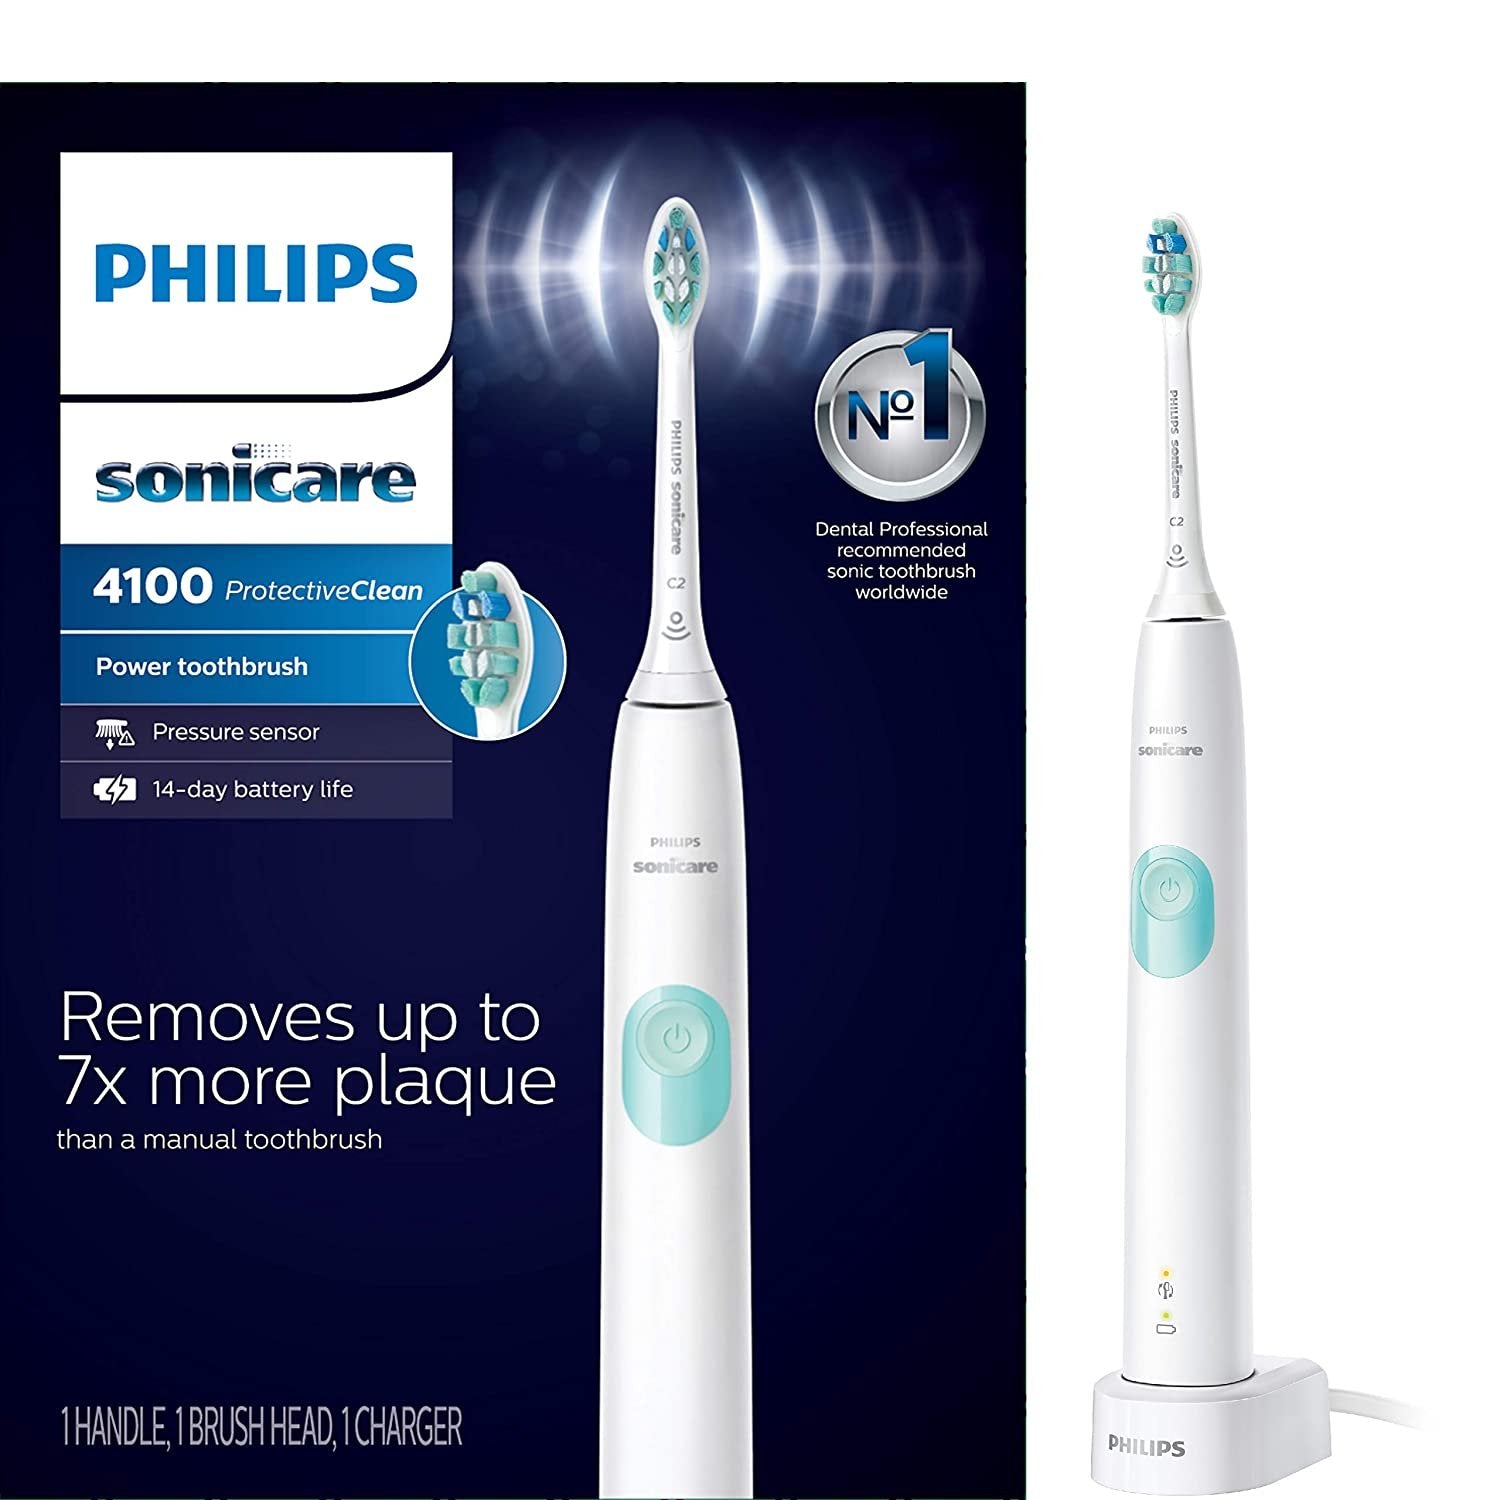 Philips Sonicare ProtectiveClean 4100 Electric Toothbrush White HX6817/01 - 1 Count